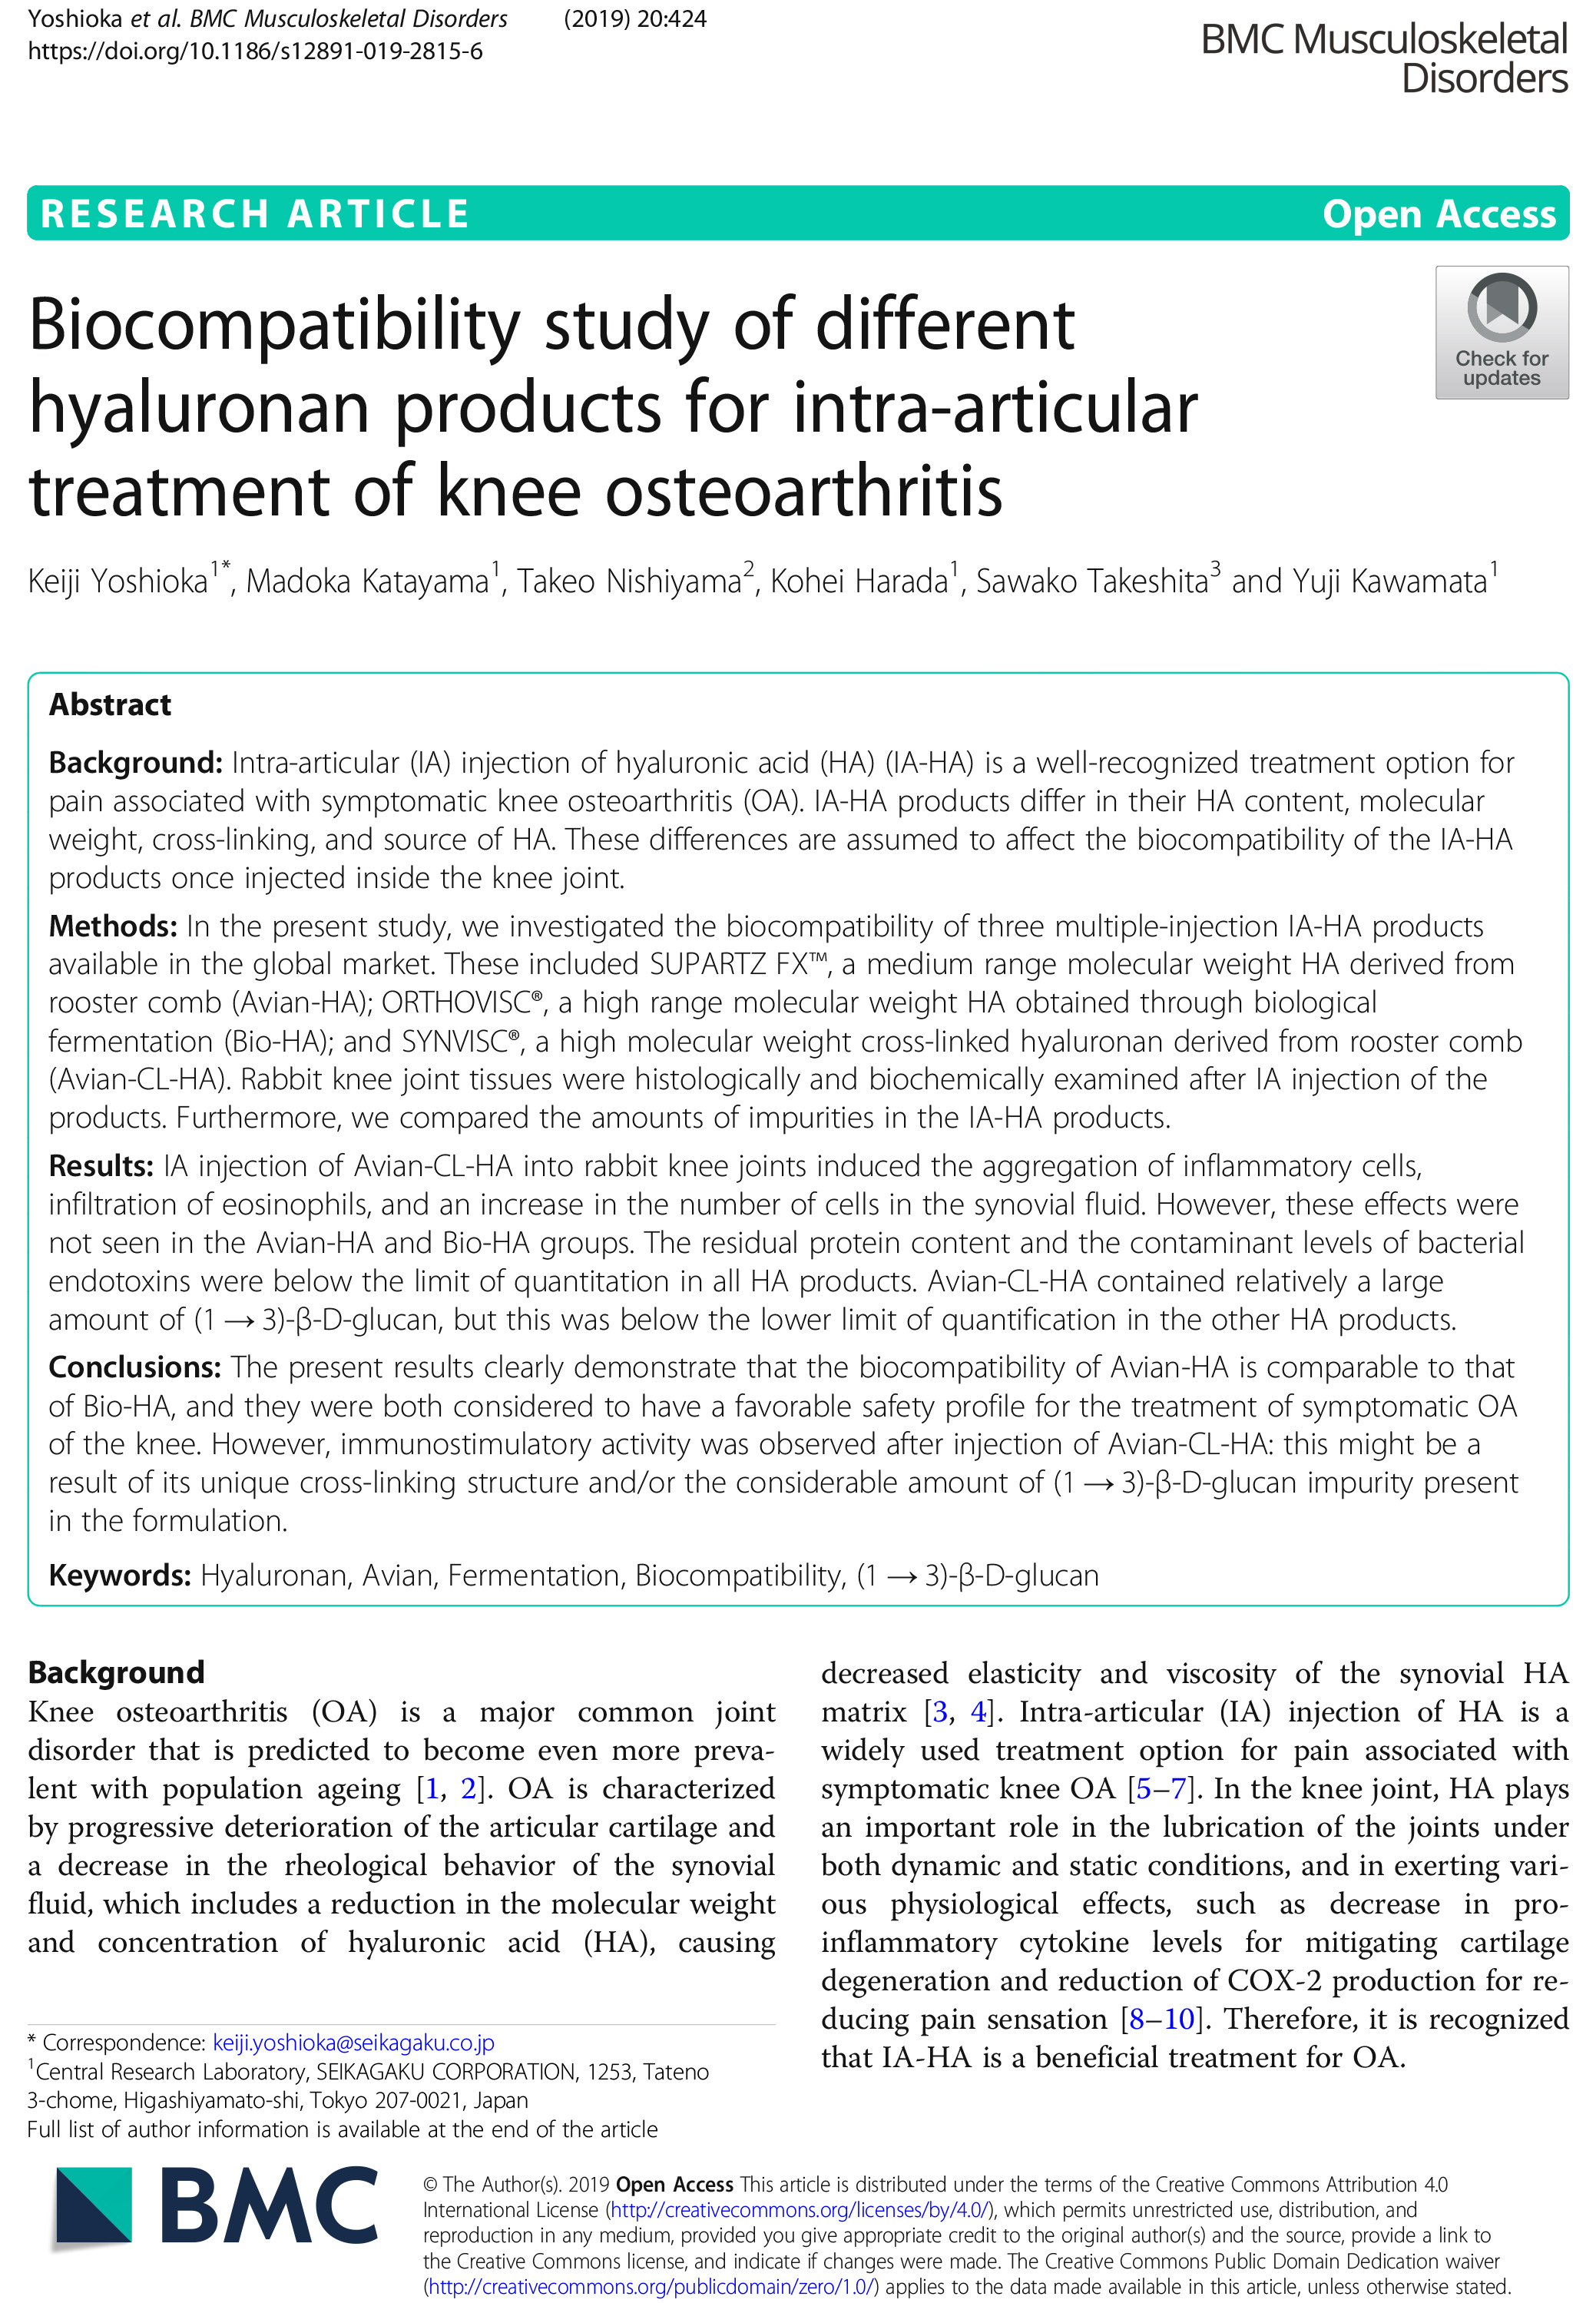 Biocompatibility_study_of_different_hyaluronan_products_for_inta_articular_treatment_of_knee-1.jpg